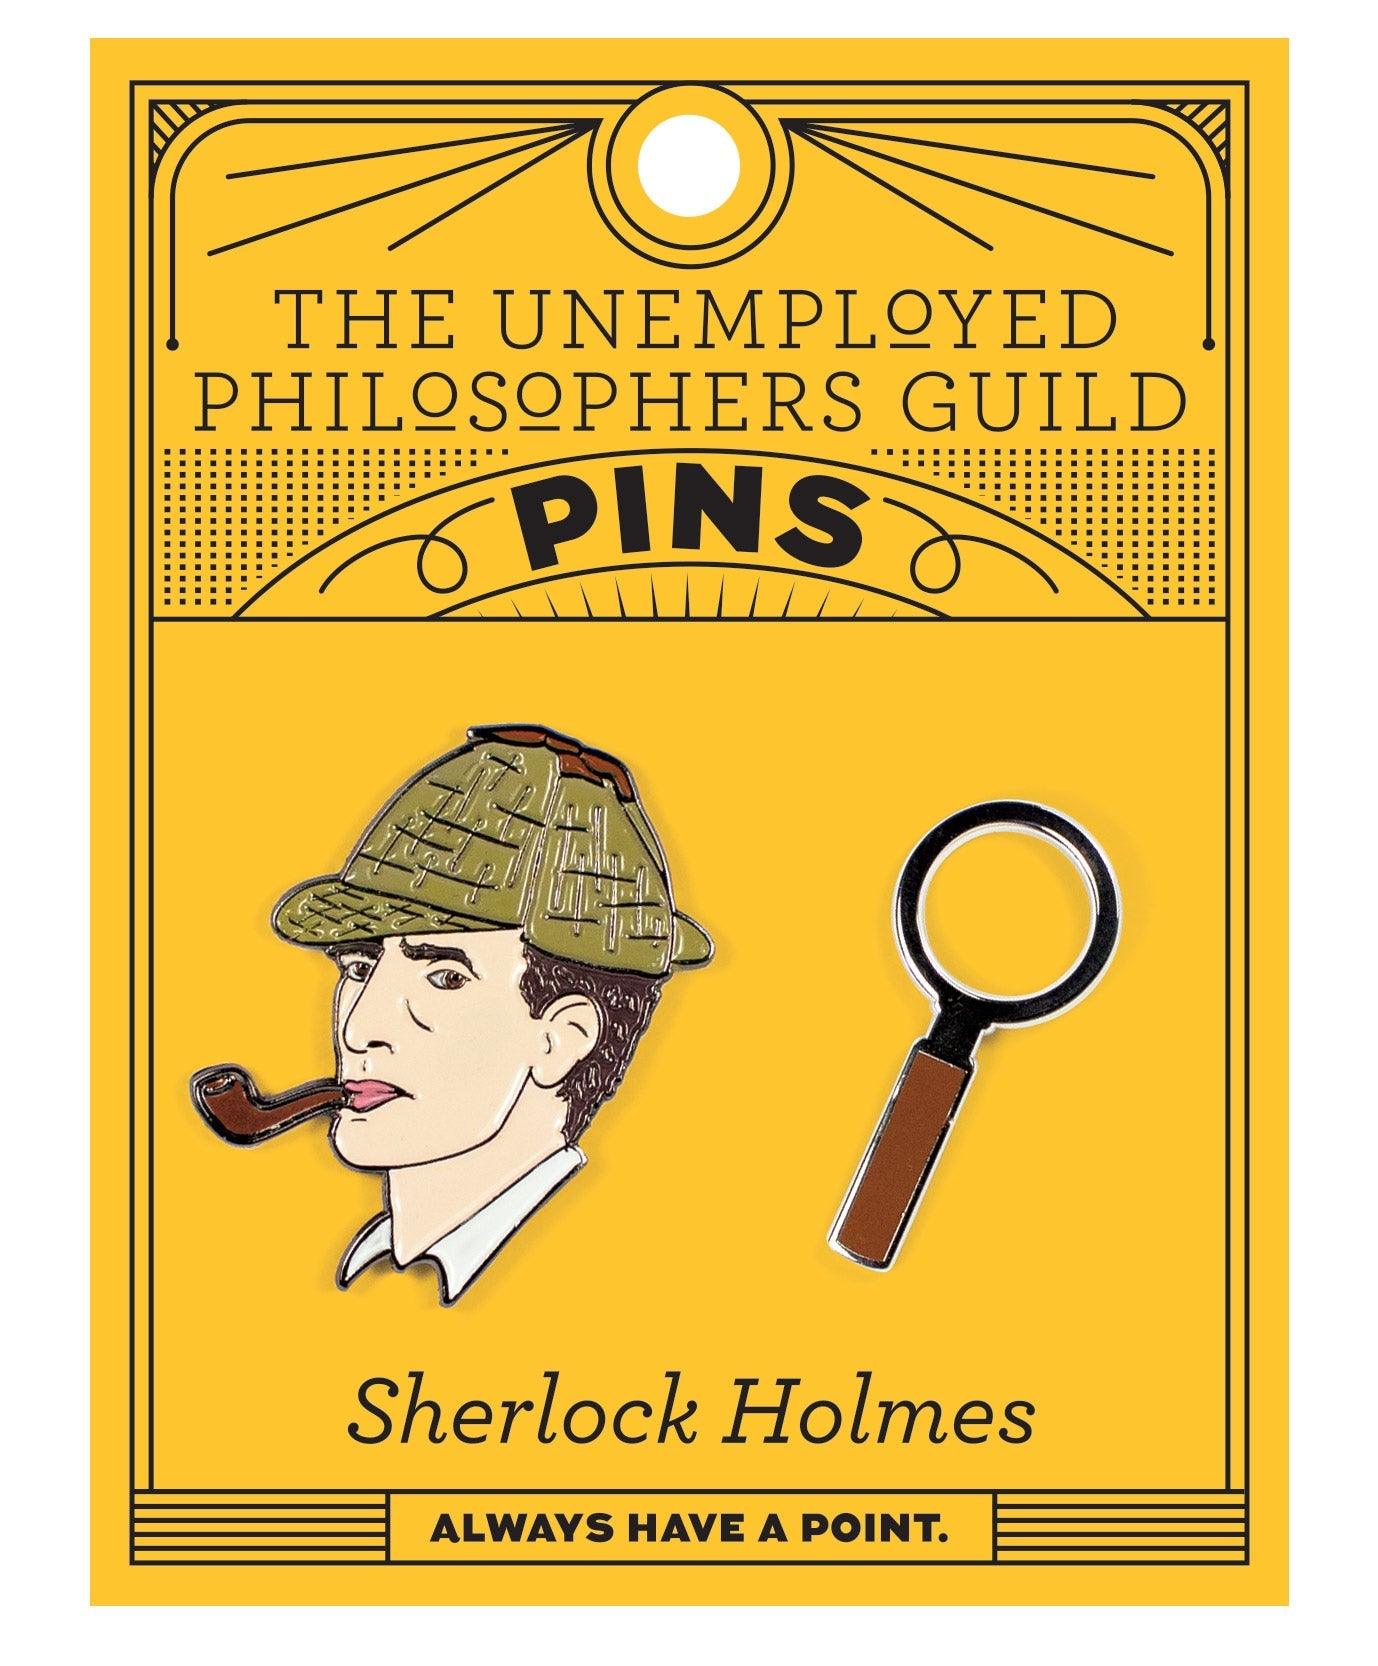 Product photo of Sherlock Holmes Enamel Pin Set, a novelty gift manufactured by The Unemployed Philosophers Guild.